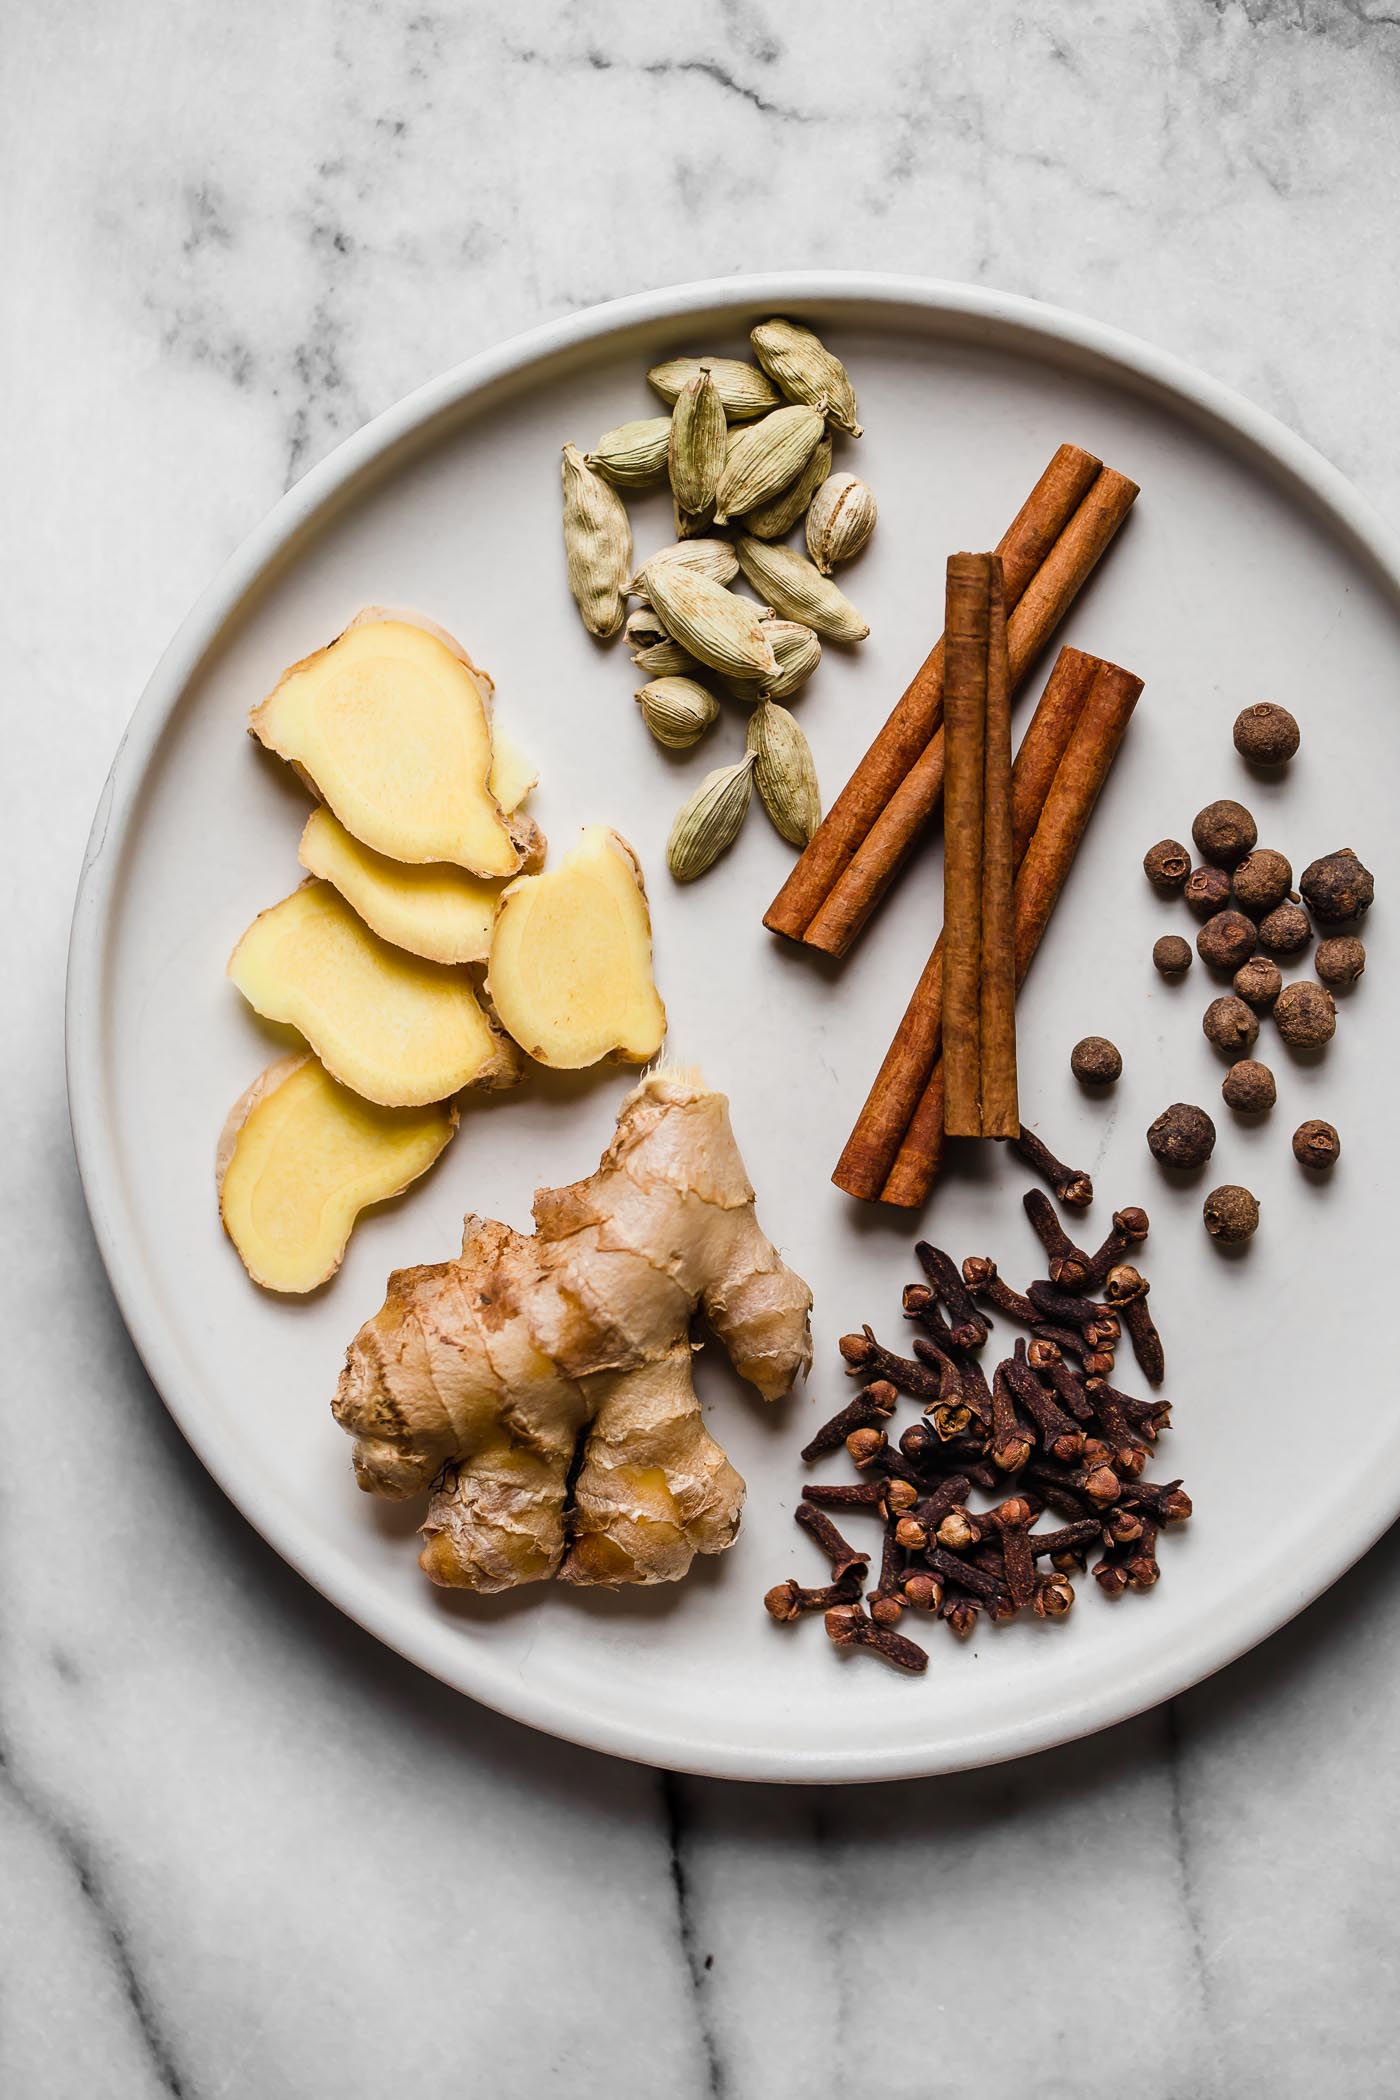 Homemade chai spice ingredients arranged on a white ceramic plate: cinnamon, cardamom, ginger, allspice, cloves, & nutmeg. The plate sits atop a white & gray marble surface.